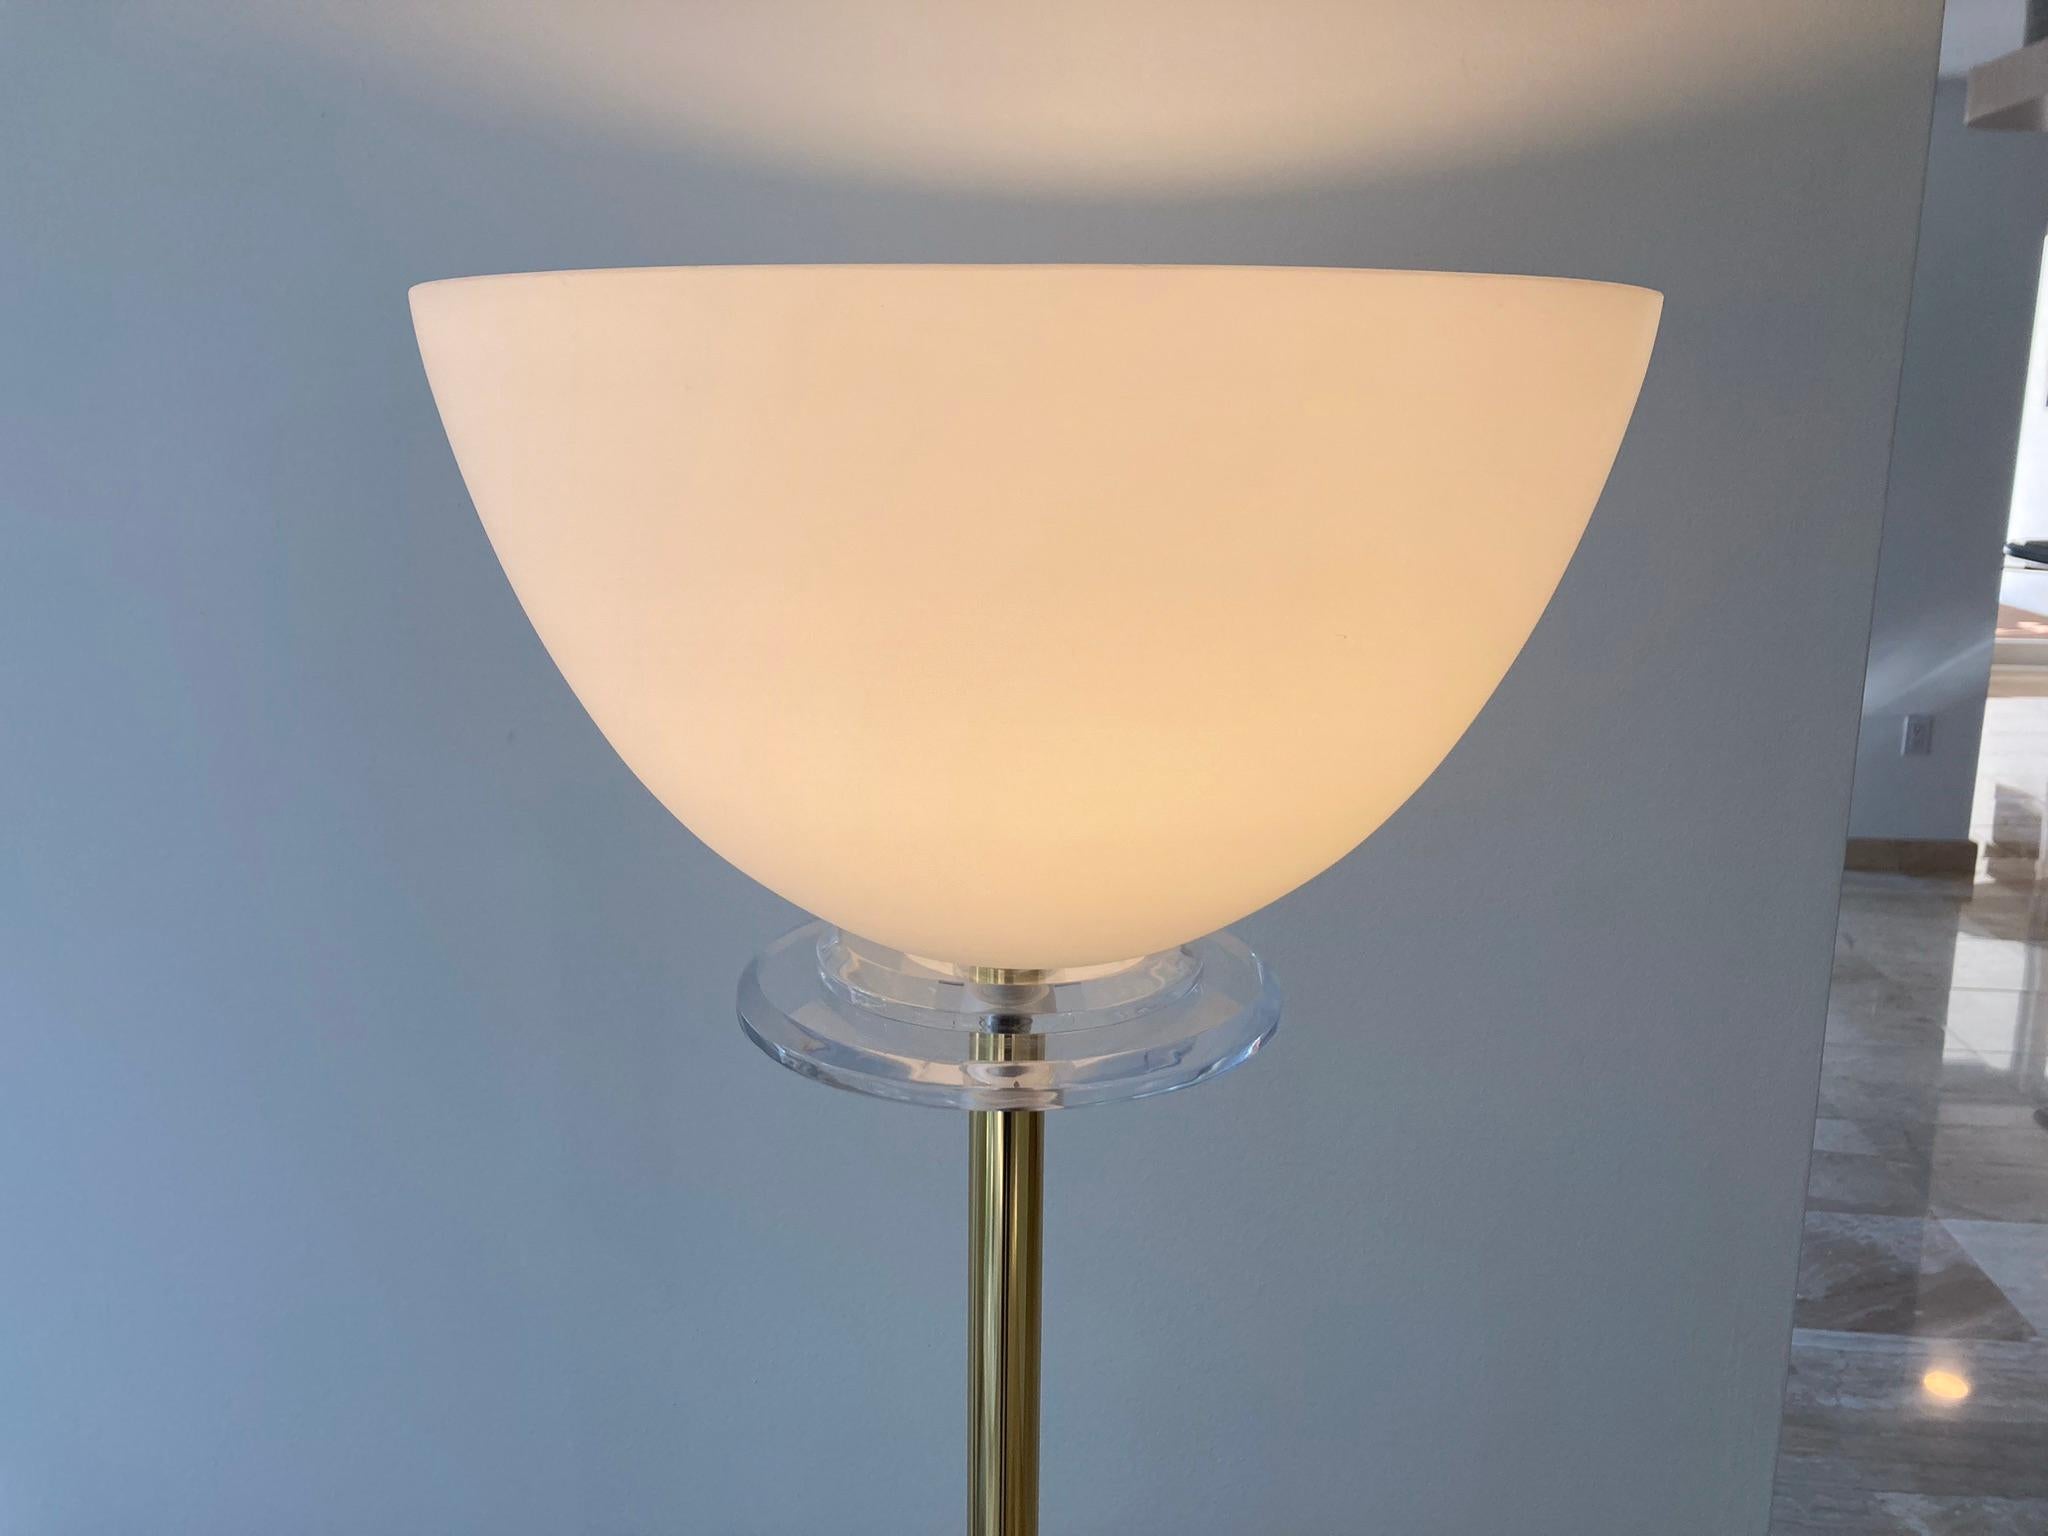 Italian floor lamp, Lucite base with brass stem and white glass shade.